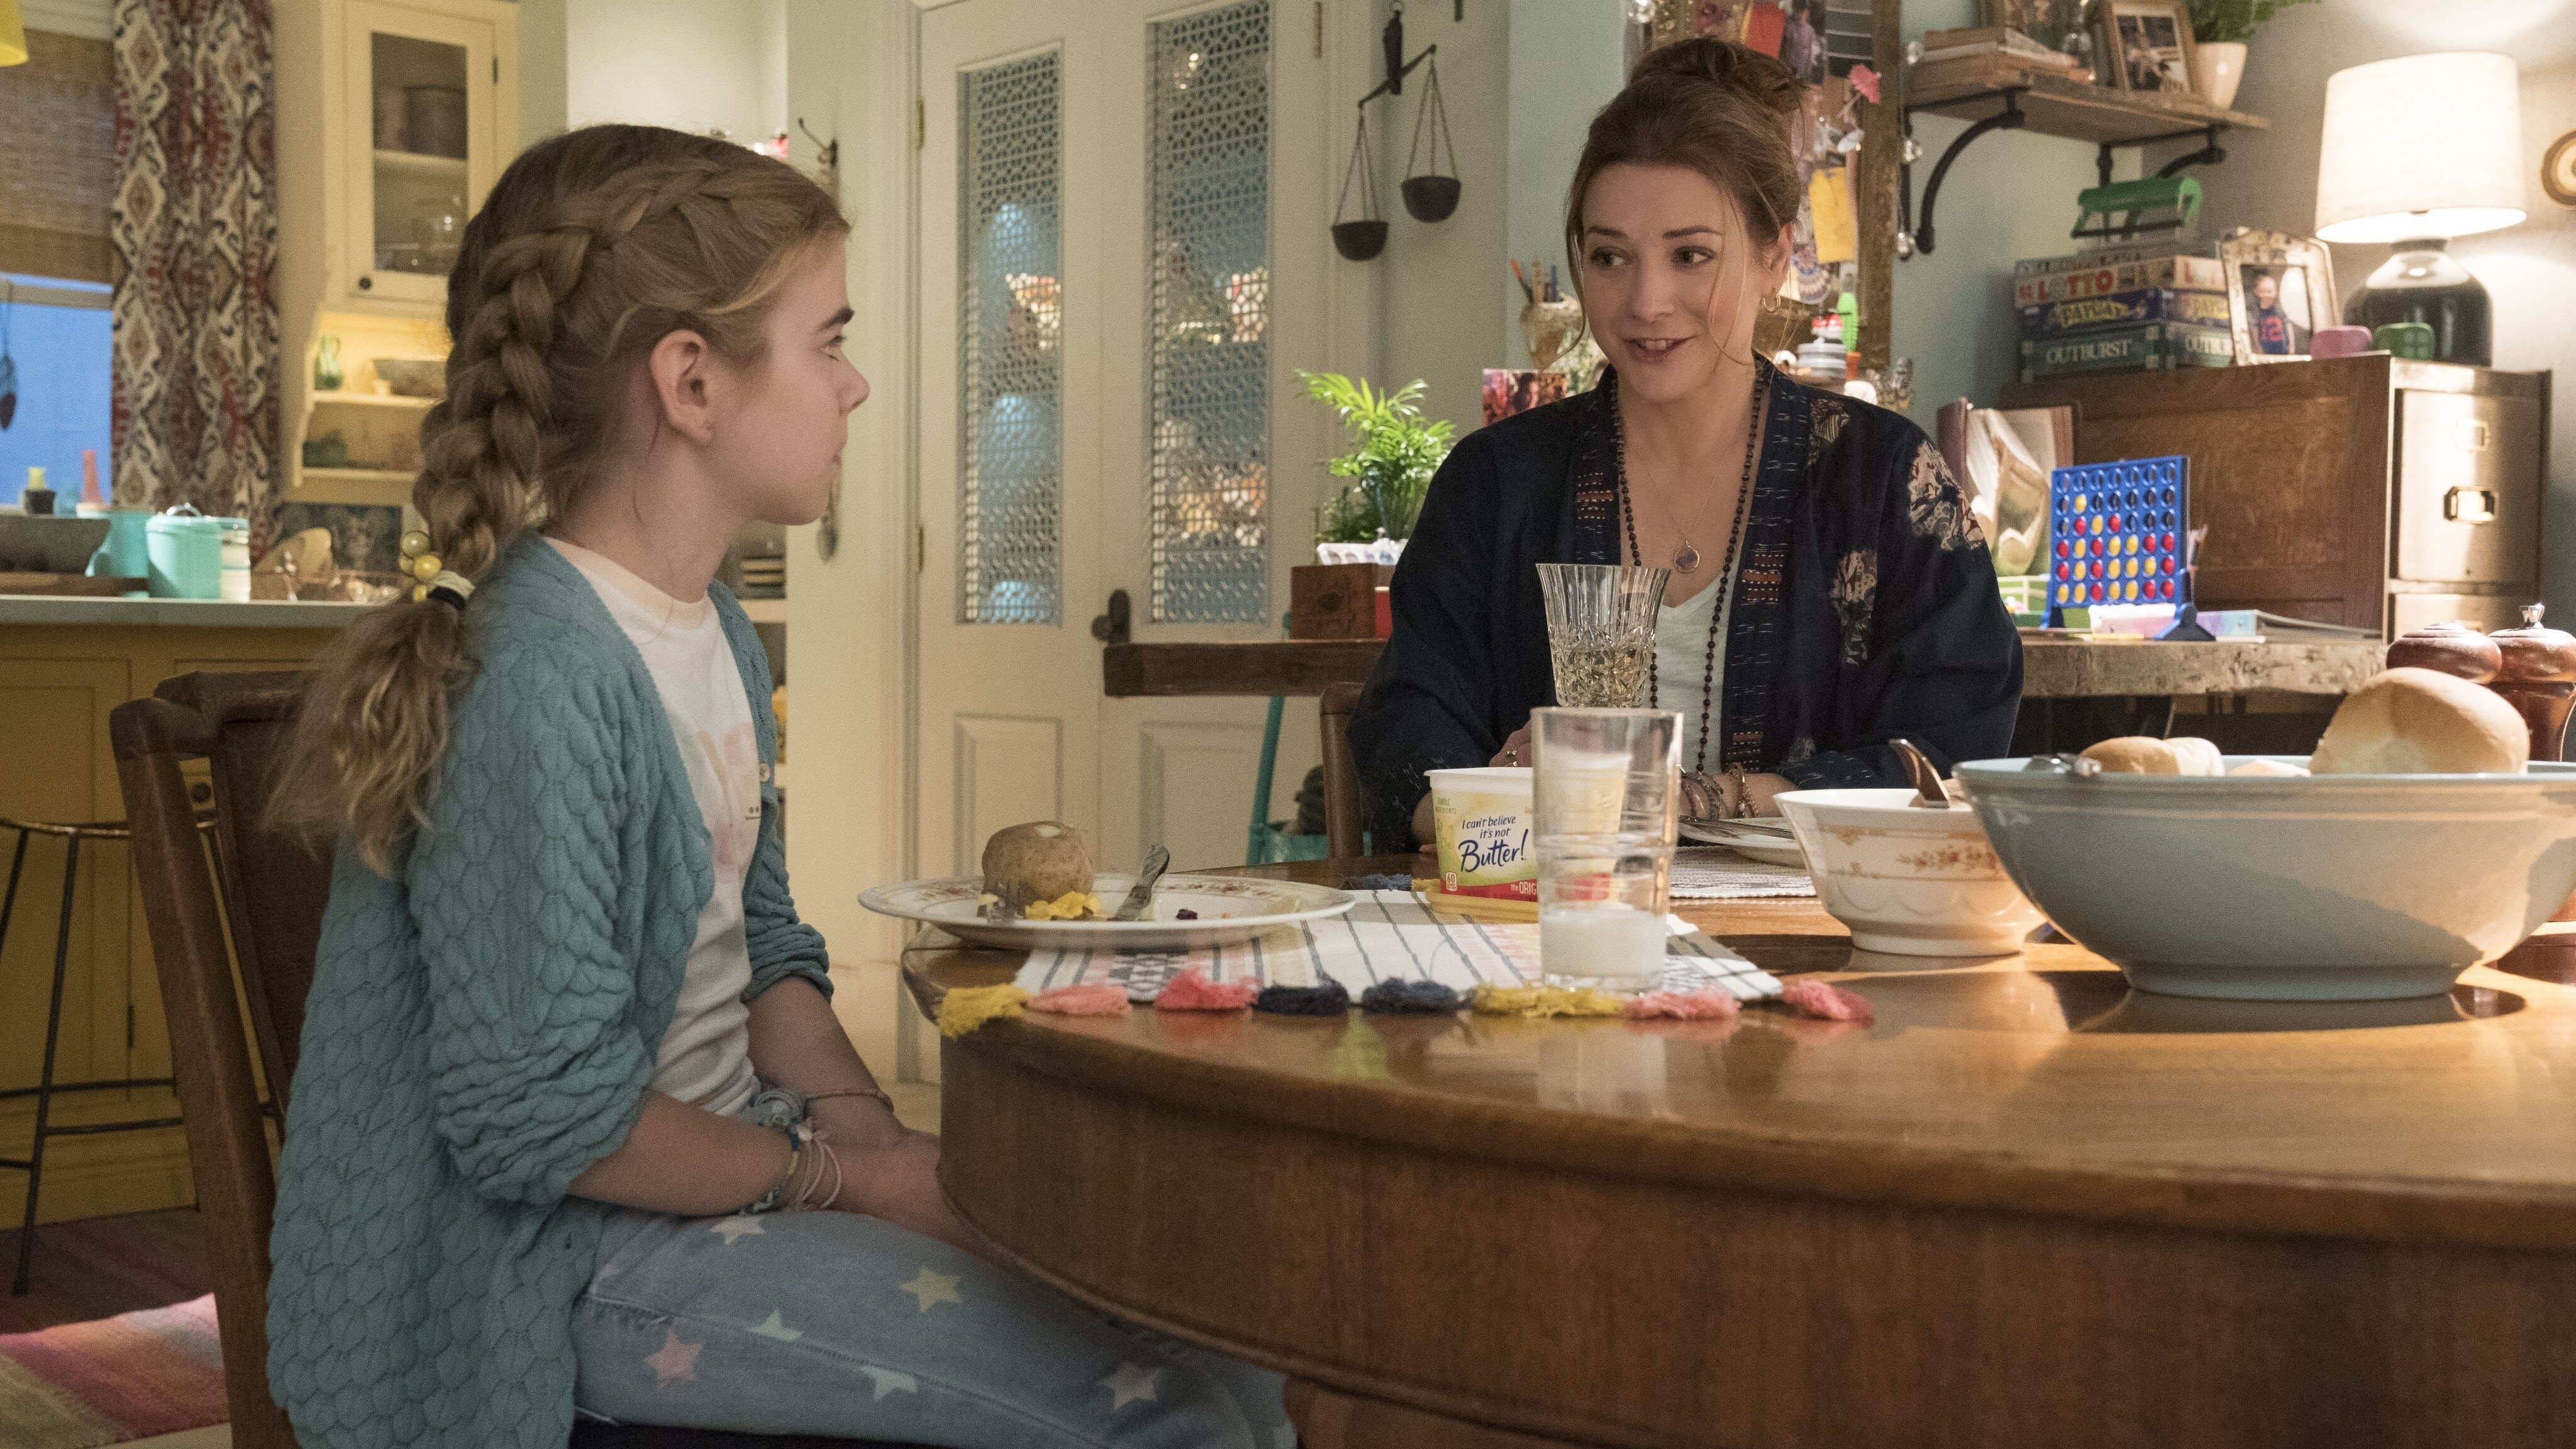 Matilda Lawler as Flora and Alyson Hannigan as Phyllis in FLORA & ULYSSES, exclusively on Disney+. Photo by Jake Giles Netter. © 2020 Disney Enterprises, Inc. All Rights Reserved.